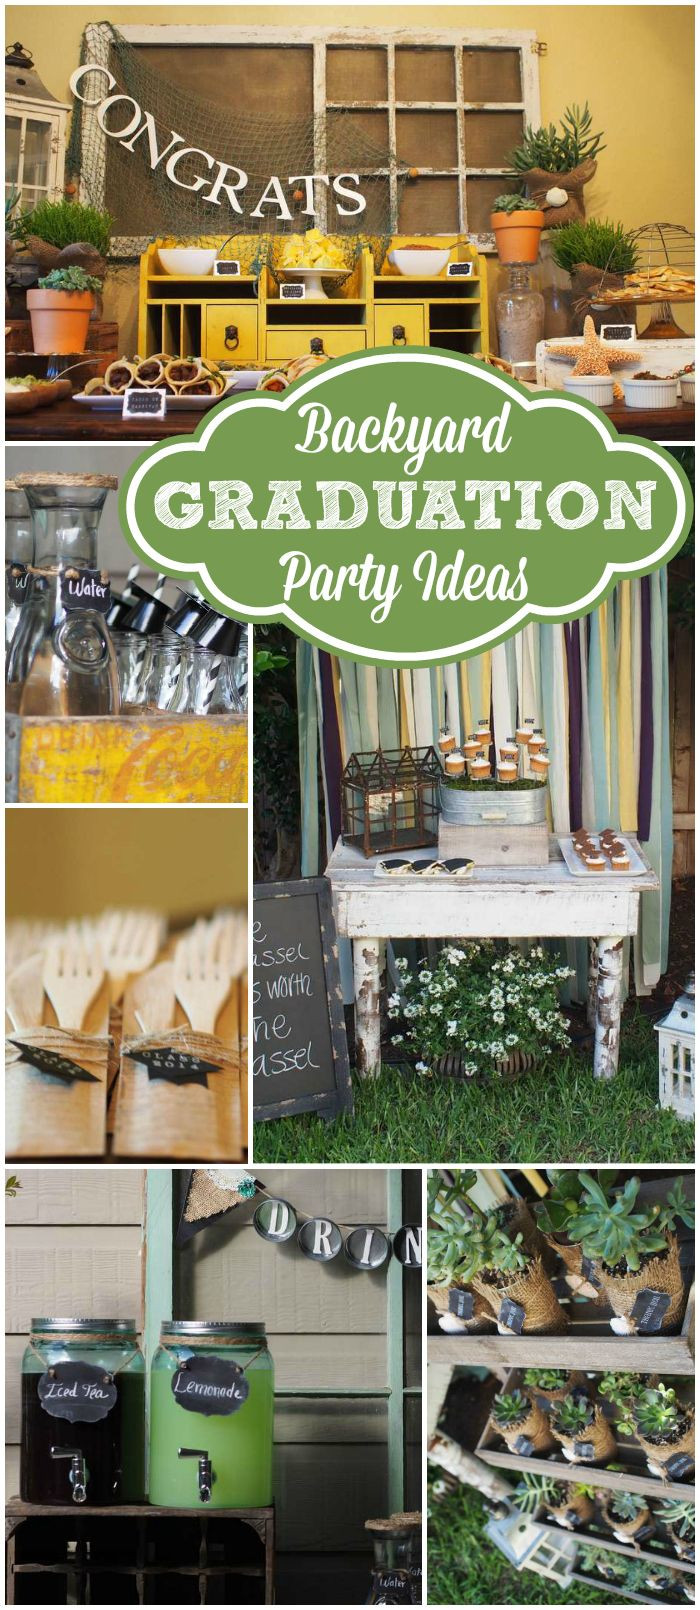 Graduation Outdoor Party Ideas
 Here s a trendy masculine outdoor graduation party See